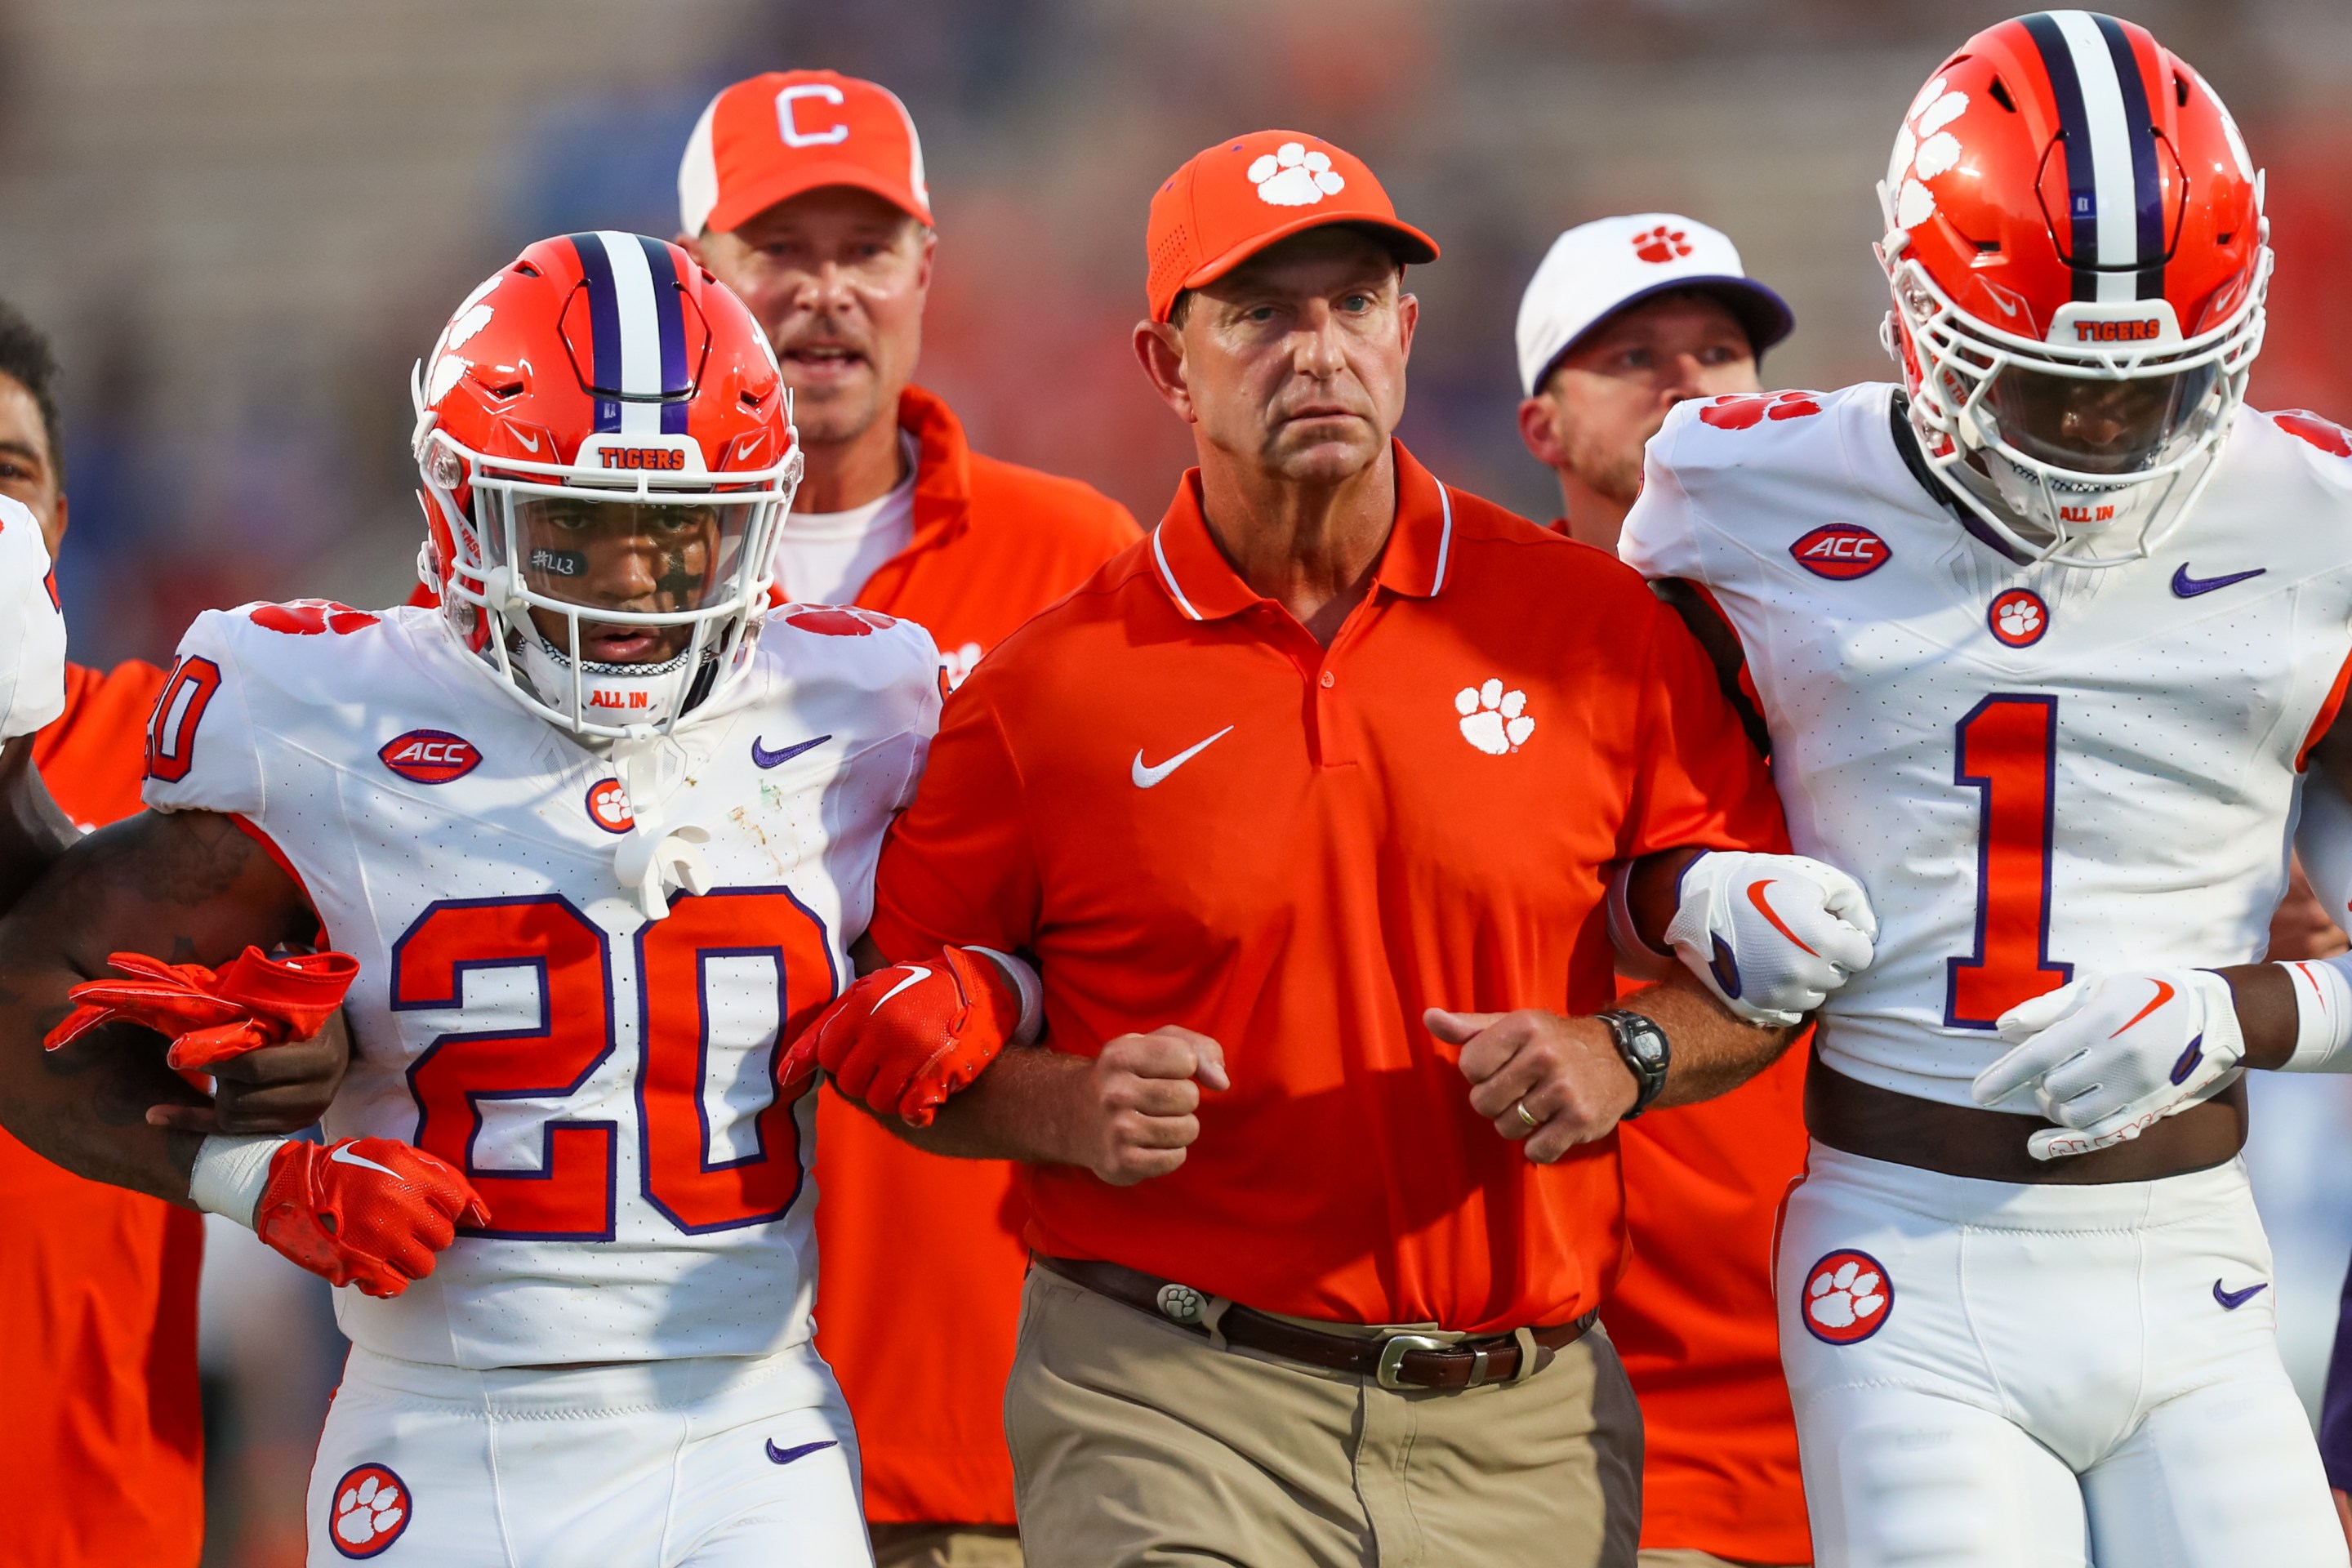 Head Coach Dabo Swinney of the Clemson Tigers walks arm in arm with his players before a football game against the Duke Blue Devils at Wallace Wade Stadium in Durham, North Carolina on Sep 4, 2023.